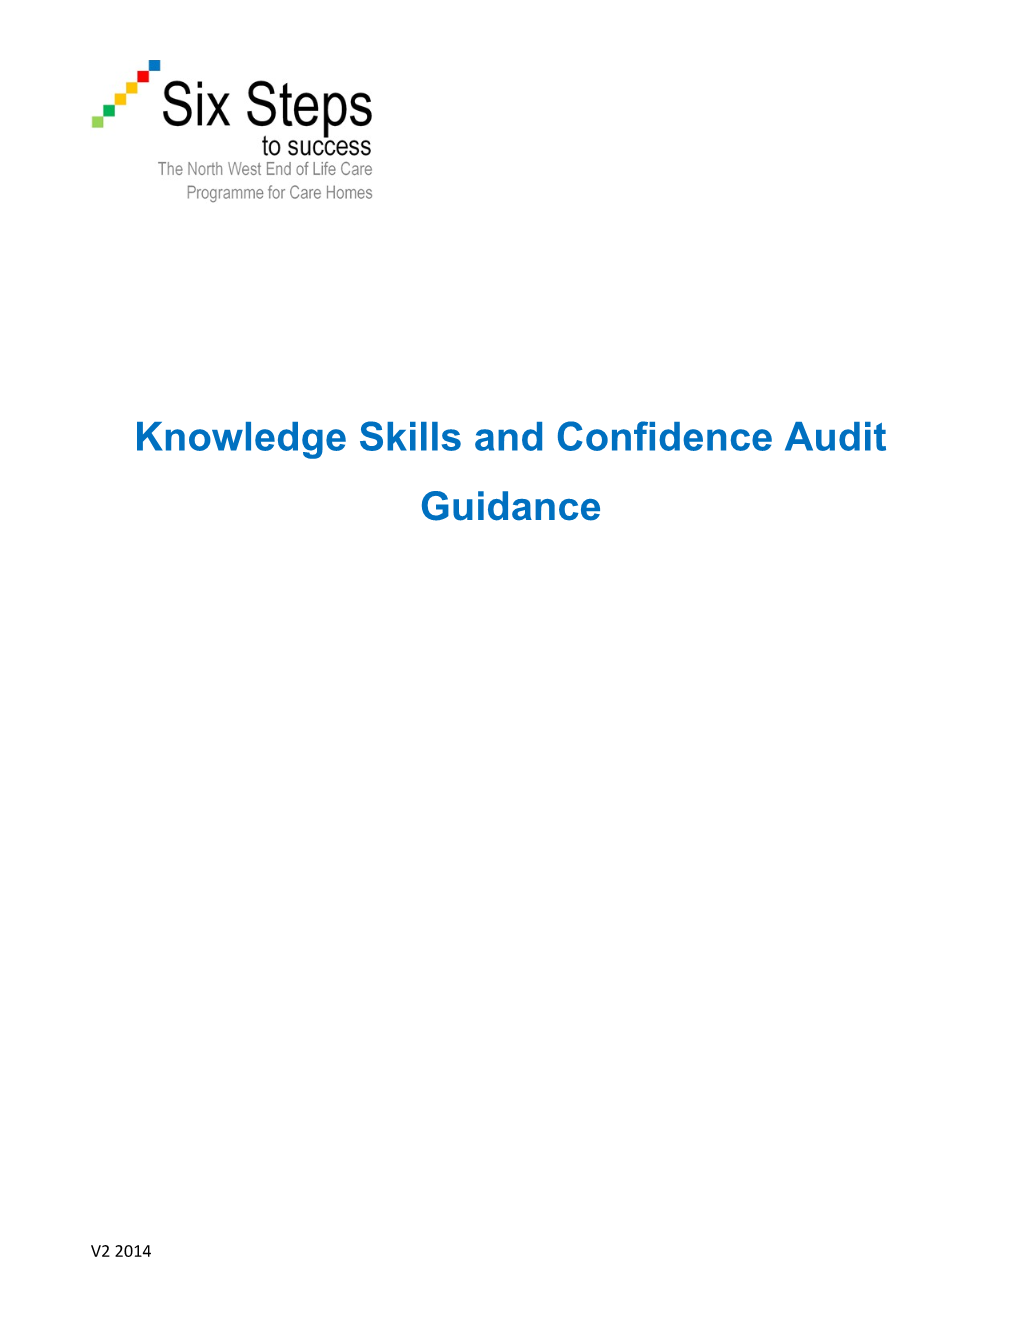 Knowledge Skills and Confidence Audit